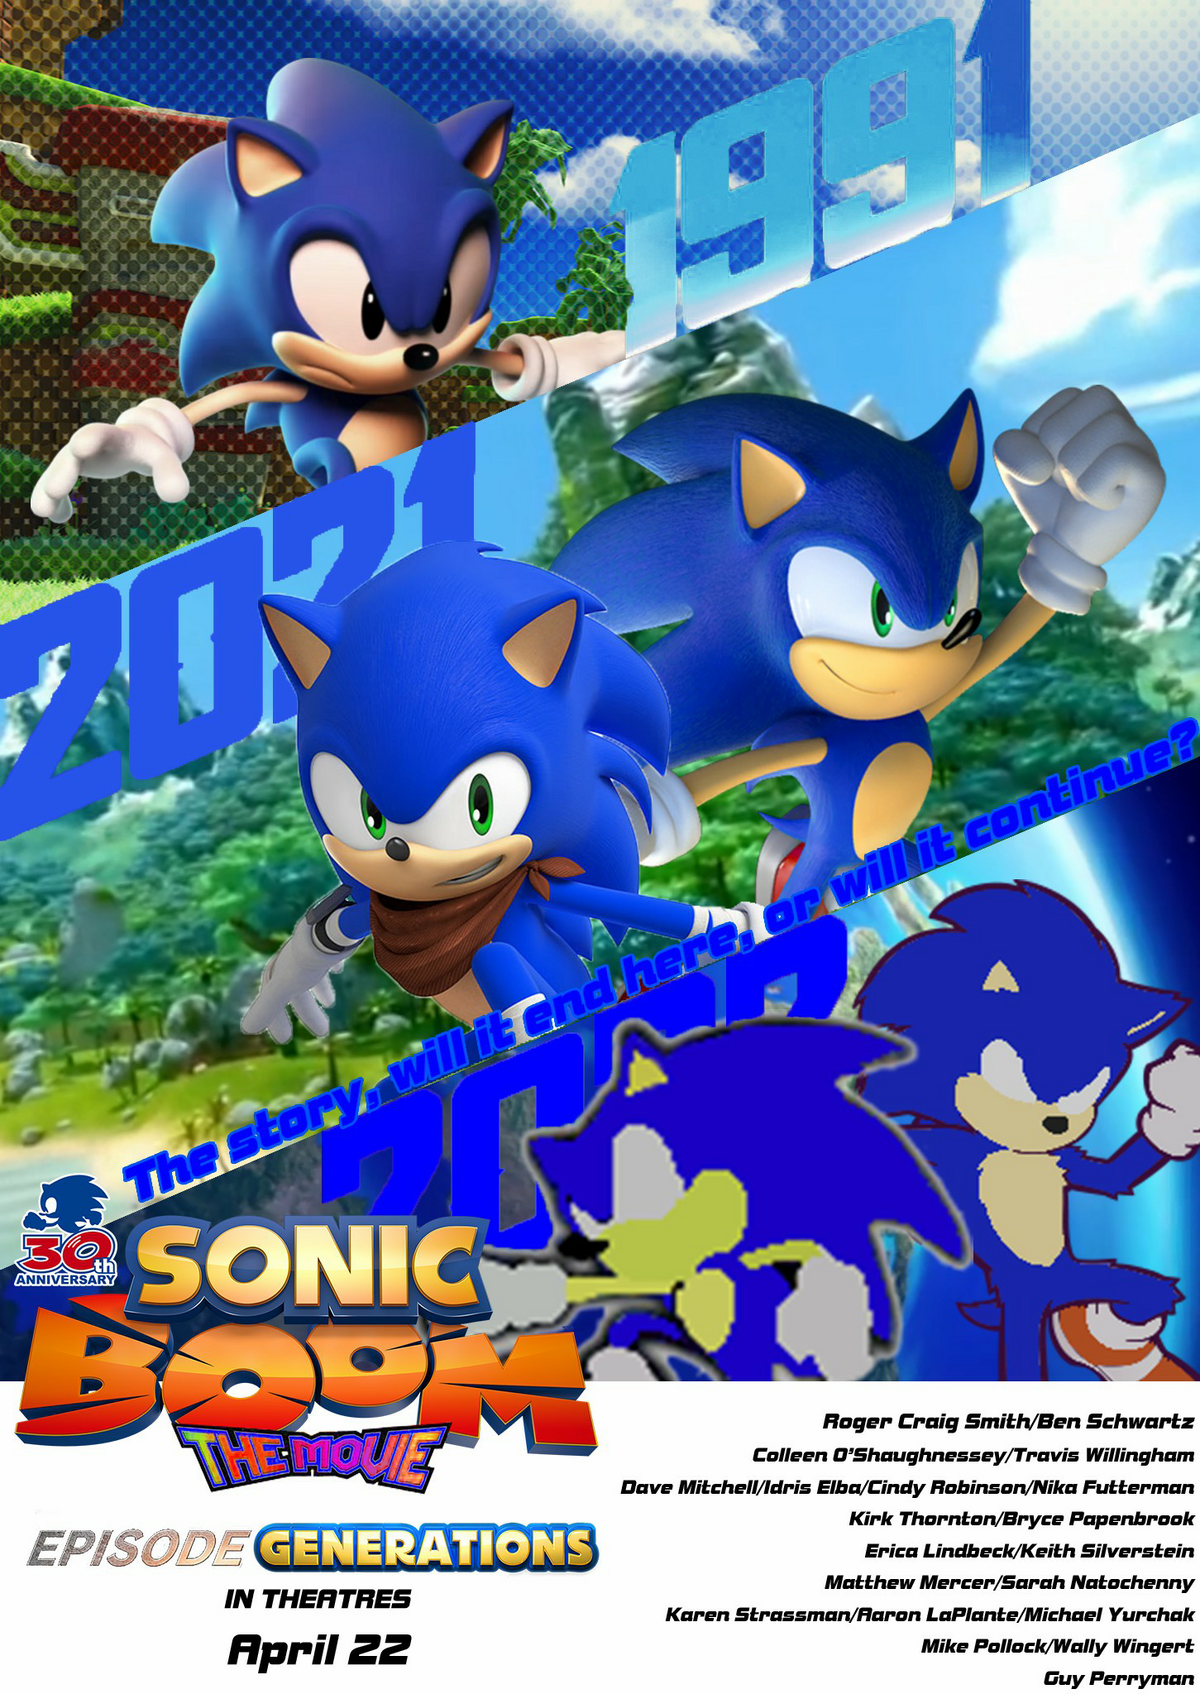 Sonic The Hedgehog - Get ready for two full weeks of all-new Sonic Boom  Episodes on Cartoon Network! Just 5 days until the premieres begin, on July  13th!